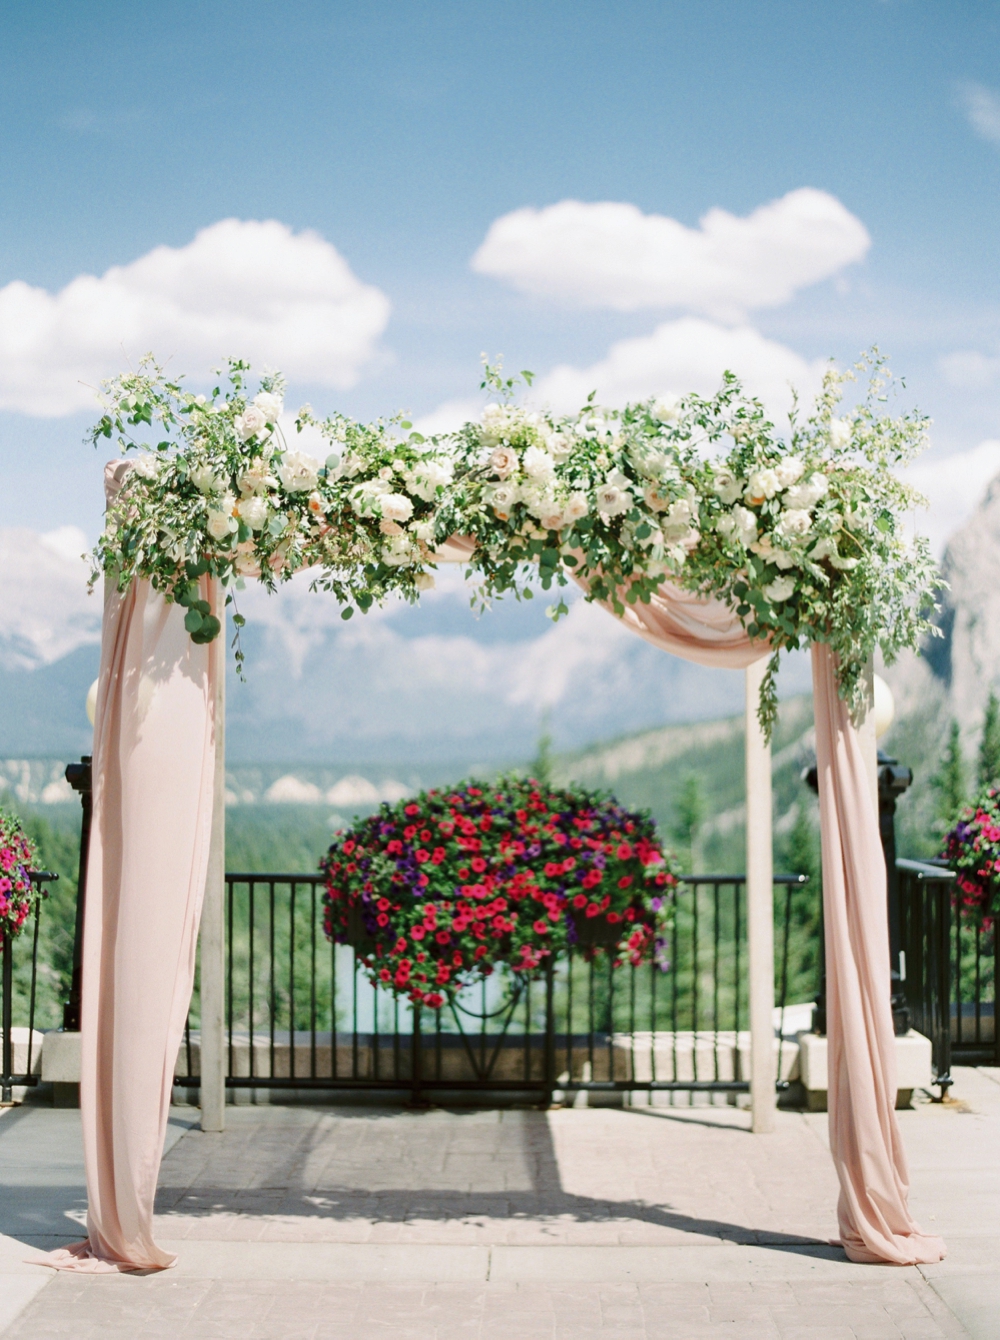 Ceremony floral arch | fairmont banff springs hotel wedding ceremony canadian rocky mountains | banff wedding photographers